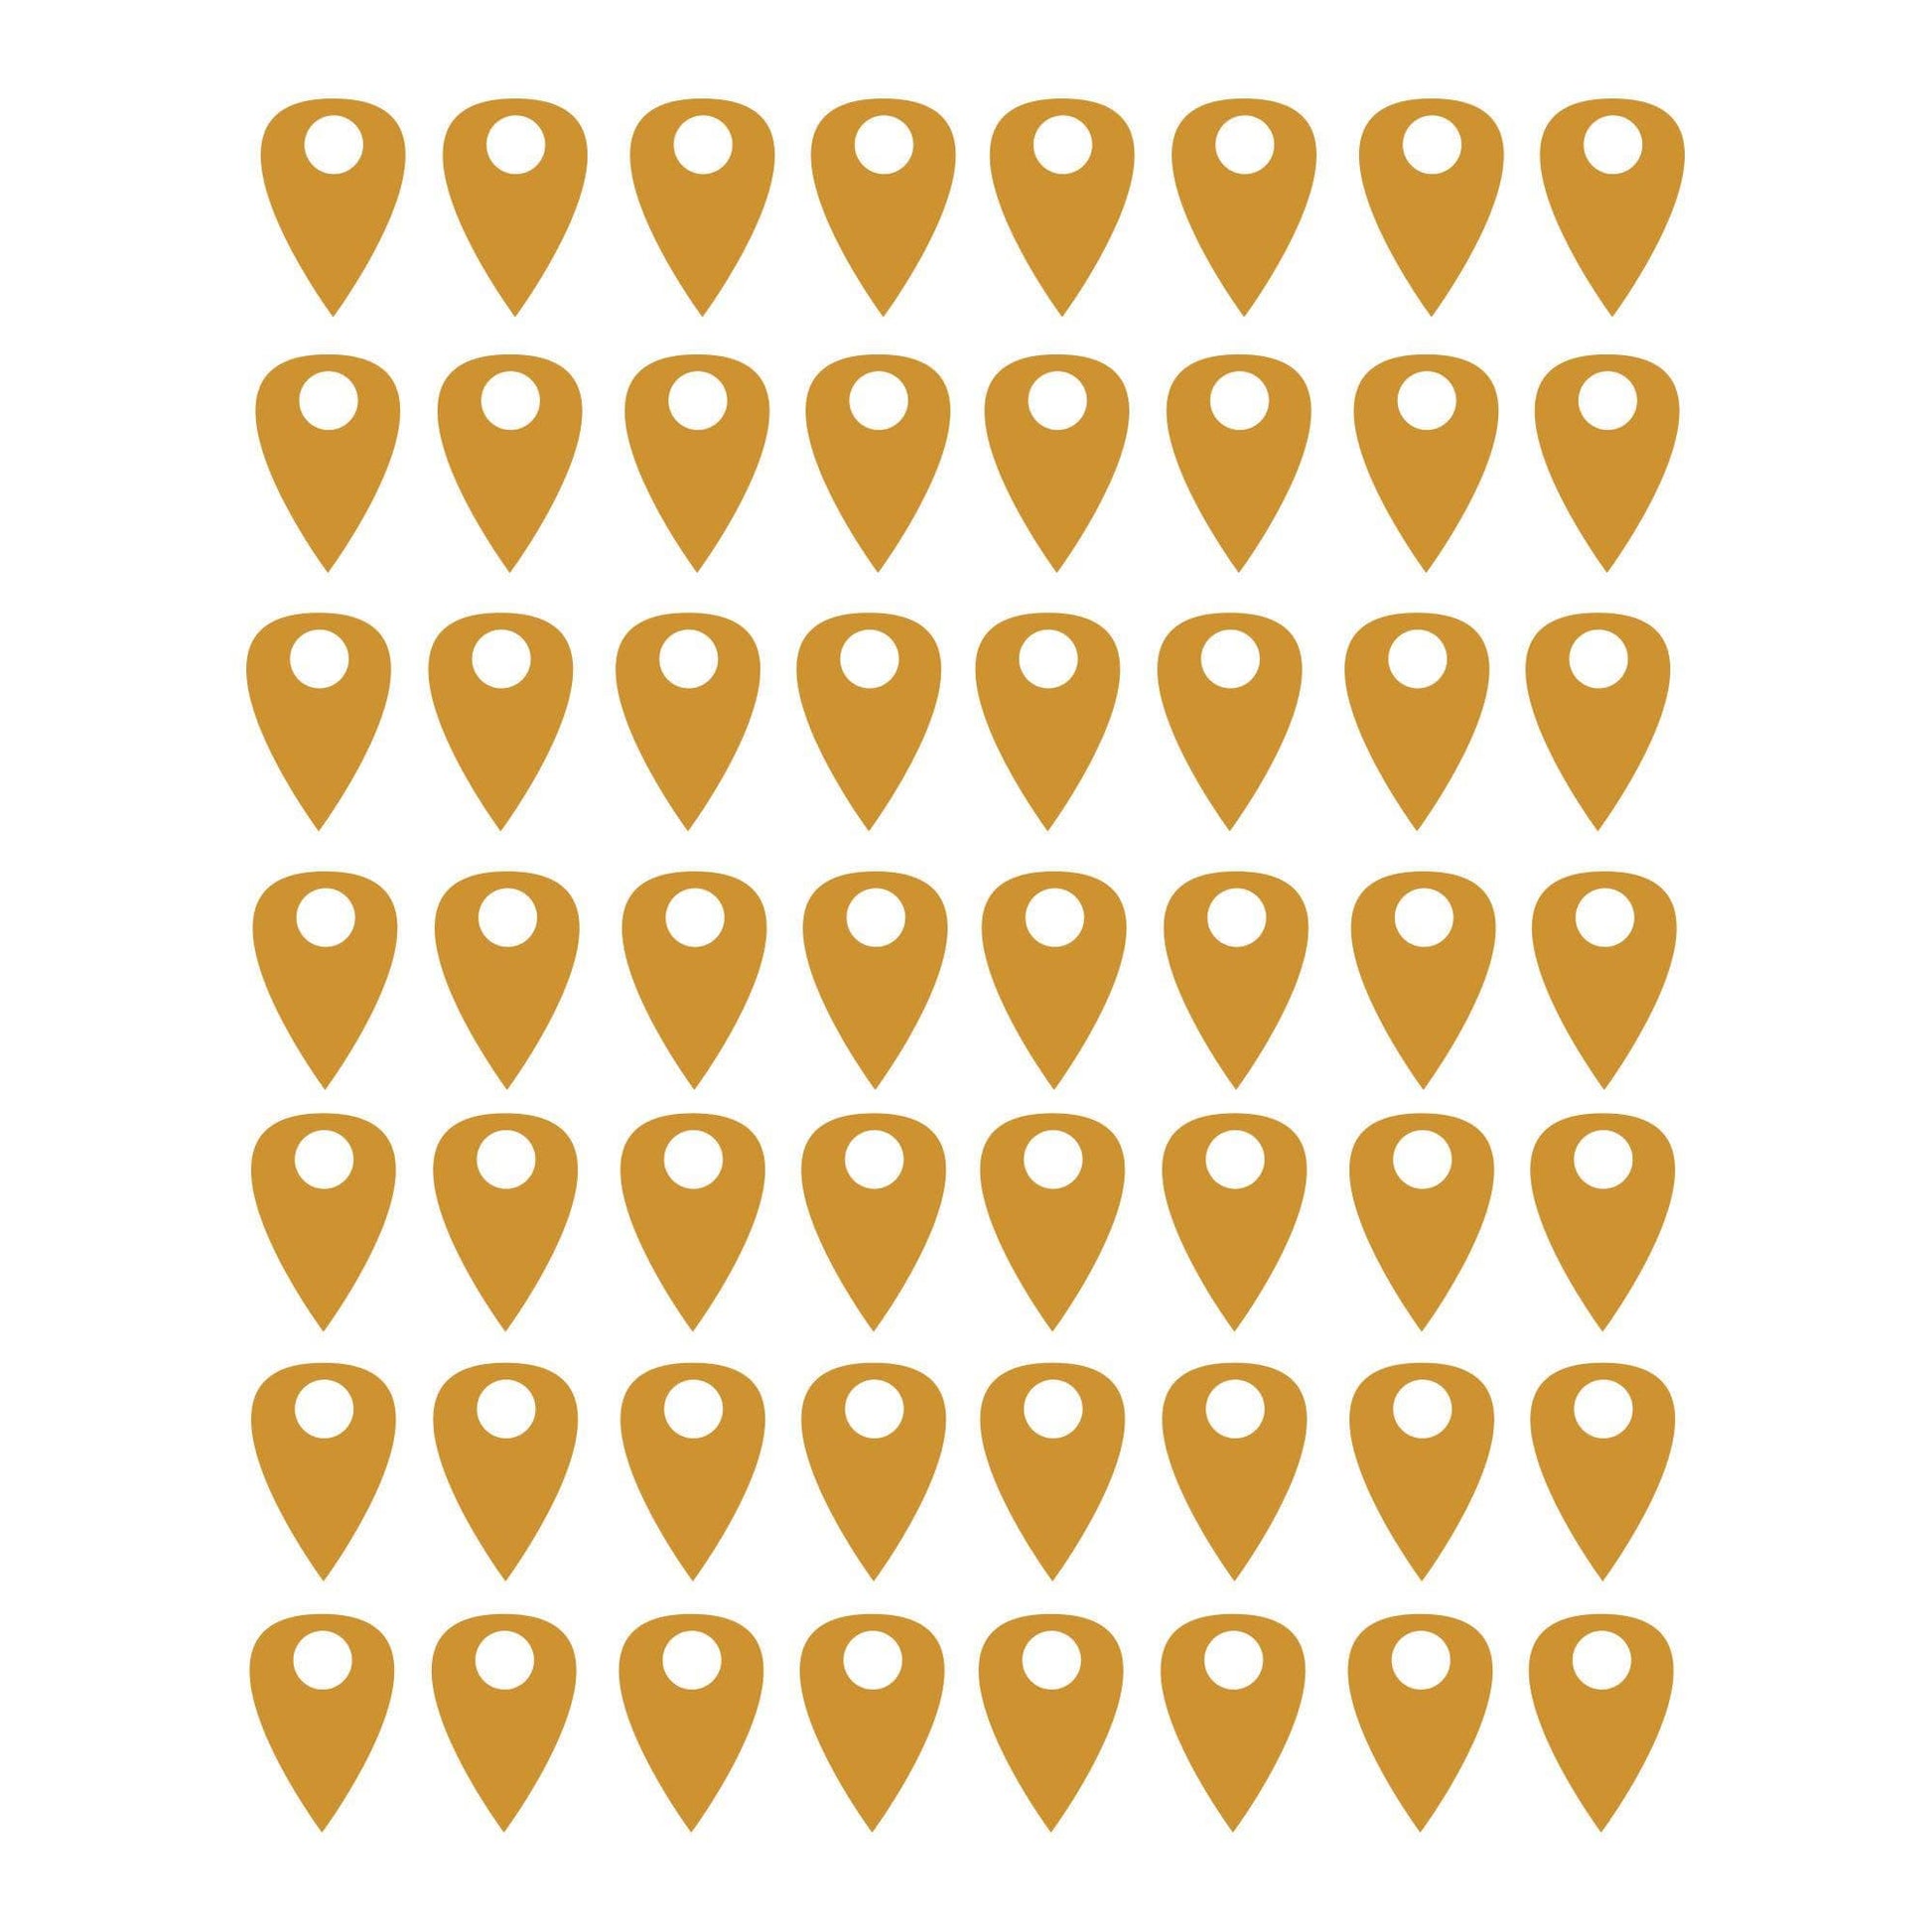 Gold pins on a white background.